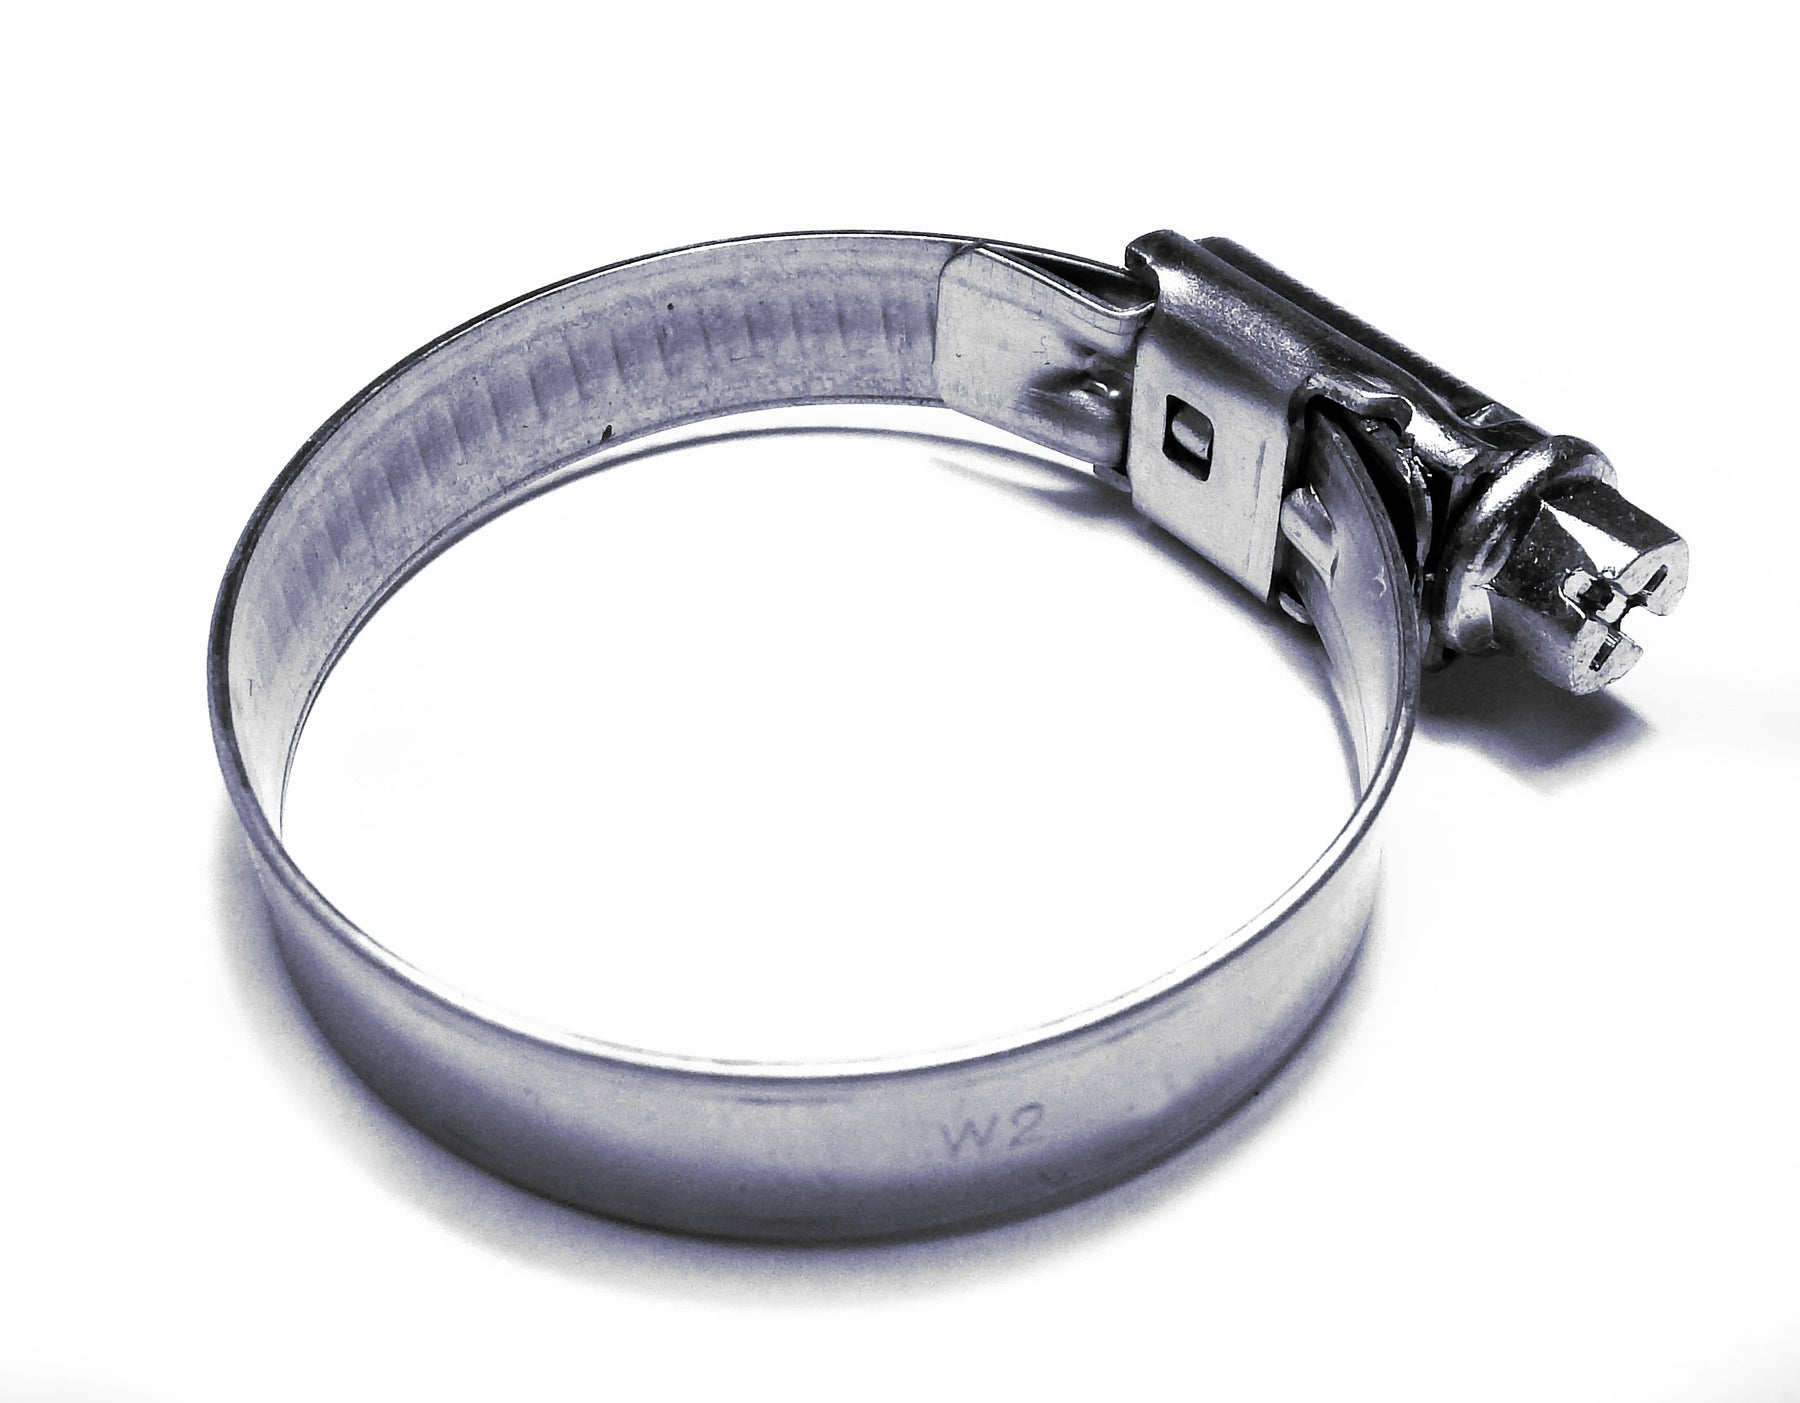 Stainless Steel Clip/Hose Clamp 32-50mm Diameter